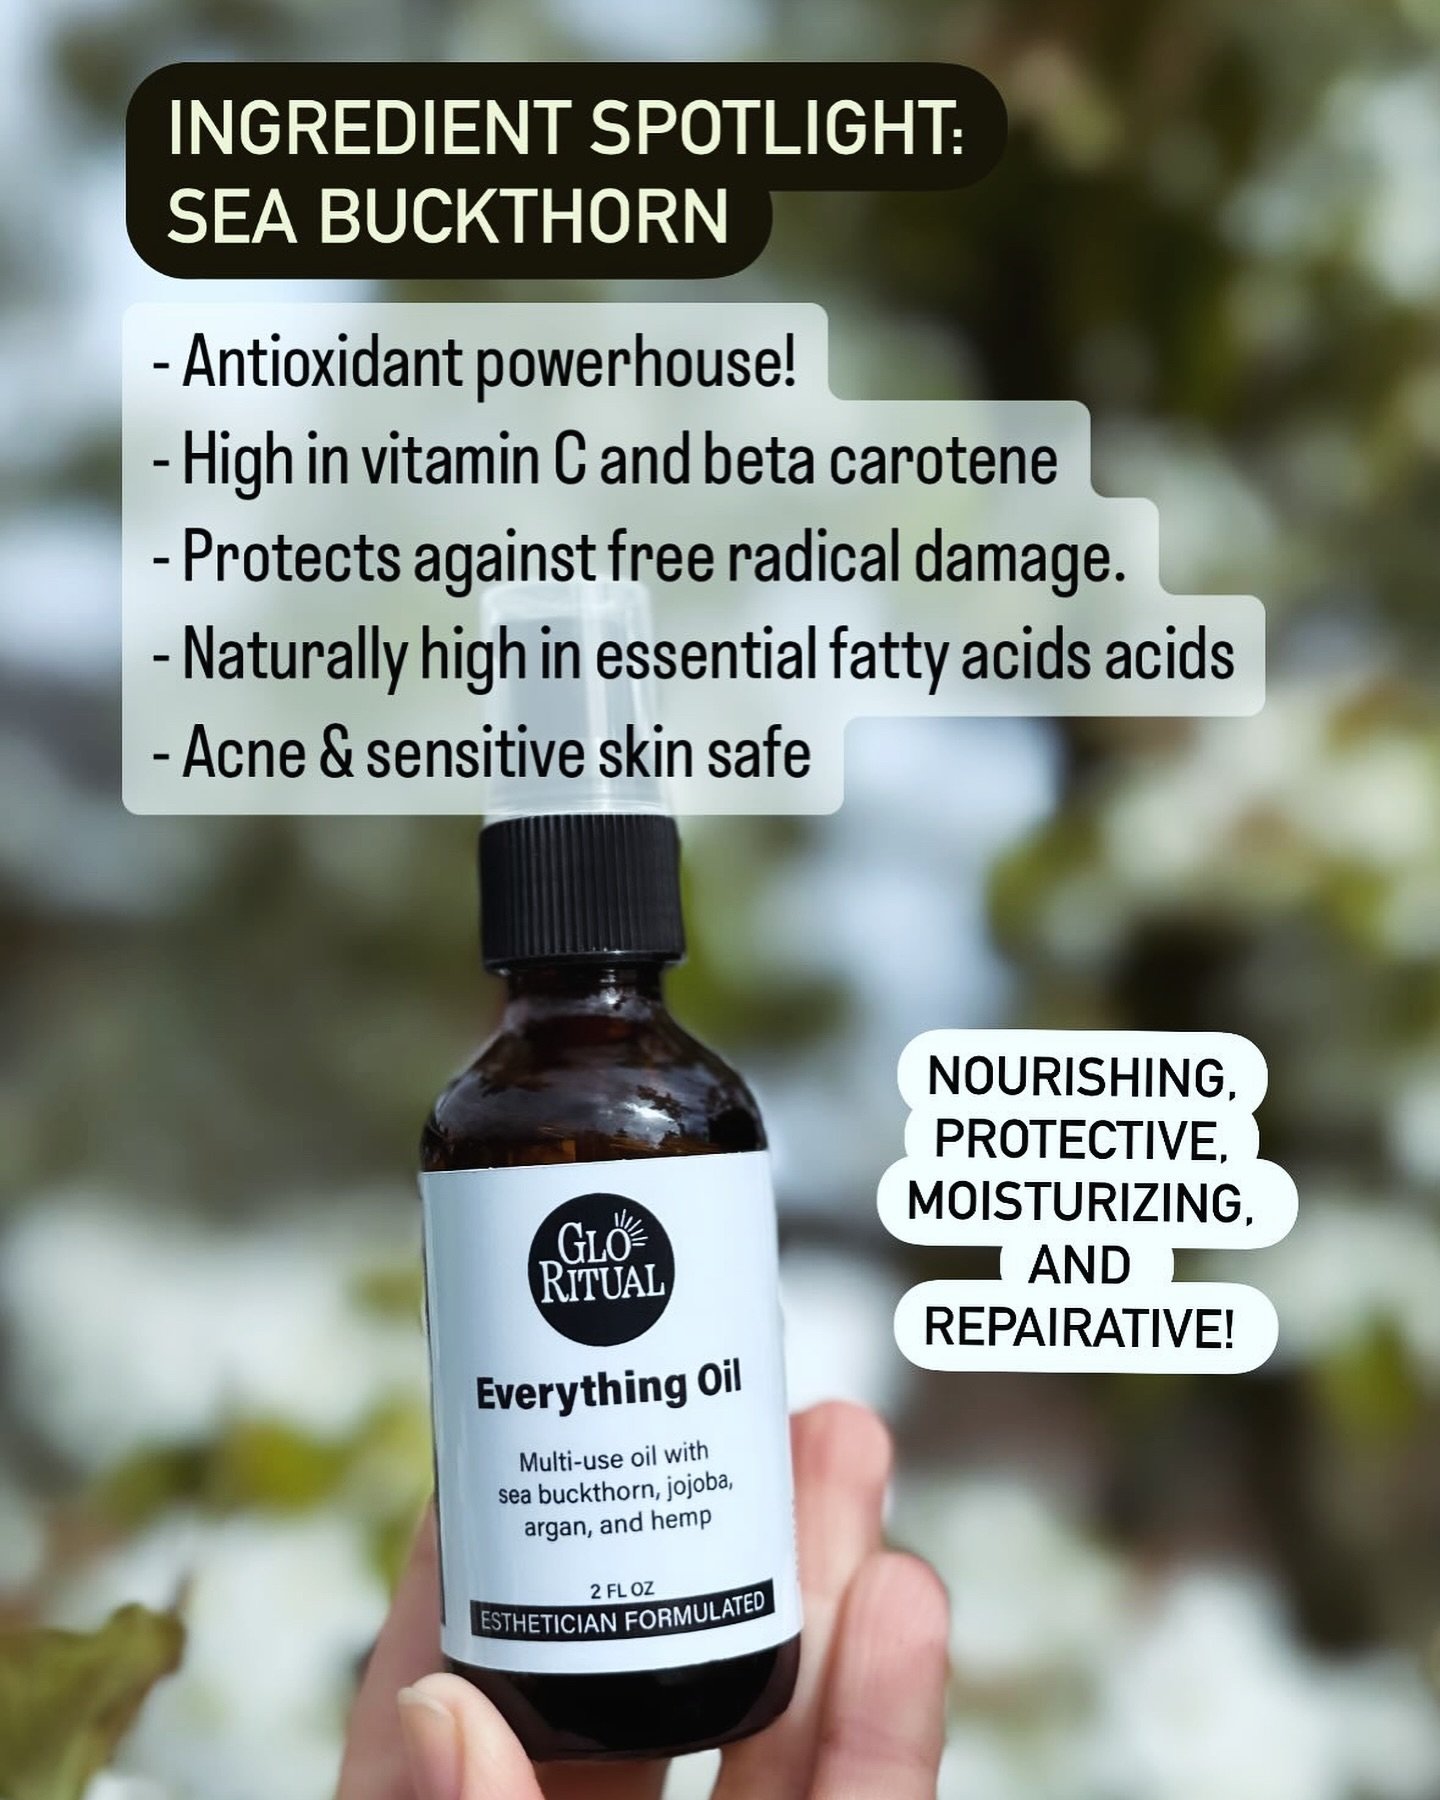 Do you find vitamin C serums to be too much for your skin? Maybe drying or irritating? Synthetic vit C has always bothered my skin. I was so excited to discover sea buckthorn oil as a wonderful way to get topical vit C naturally. And it actually feel